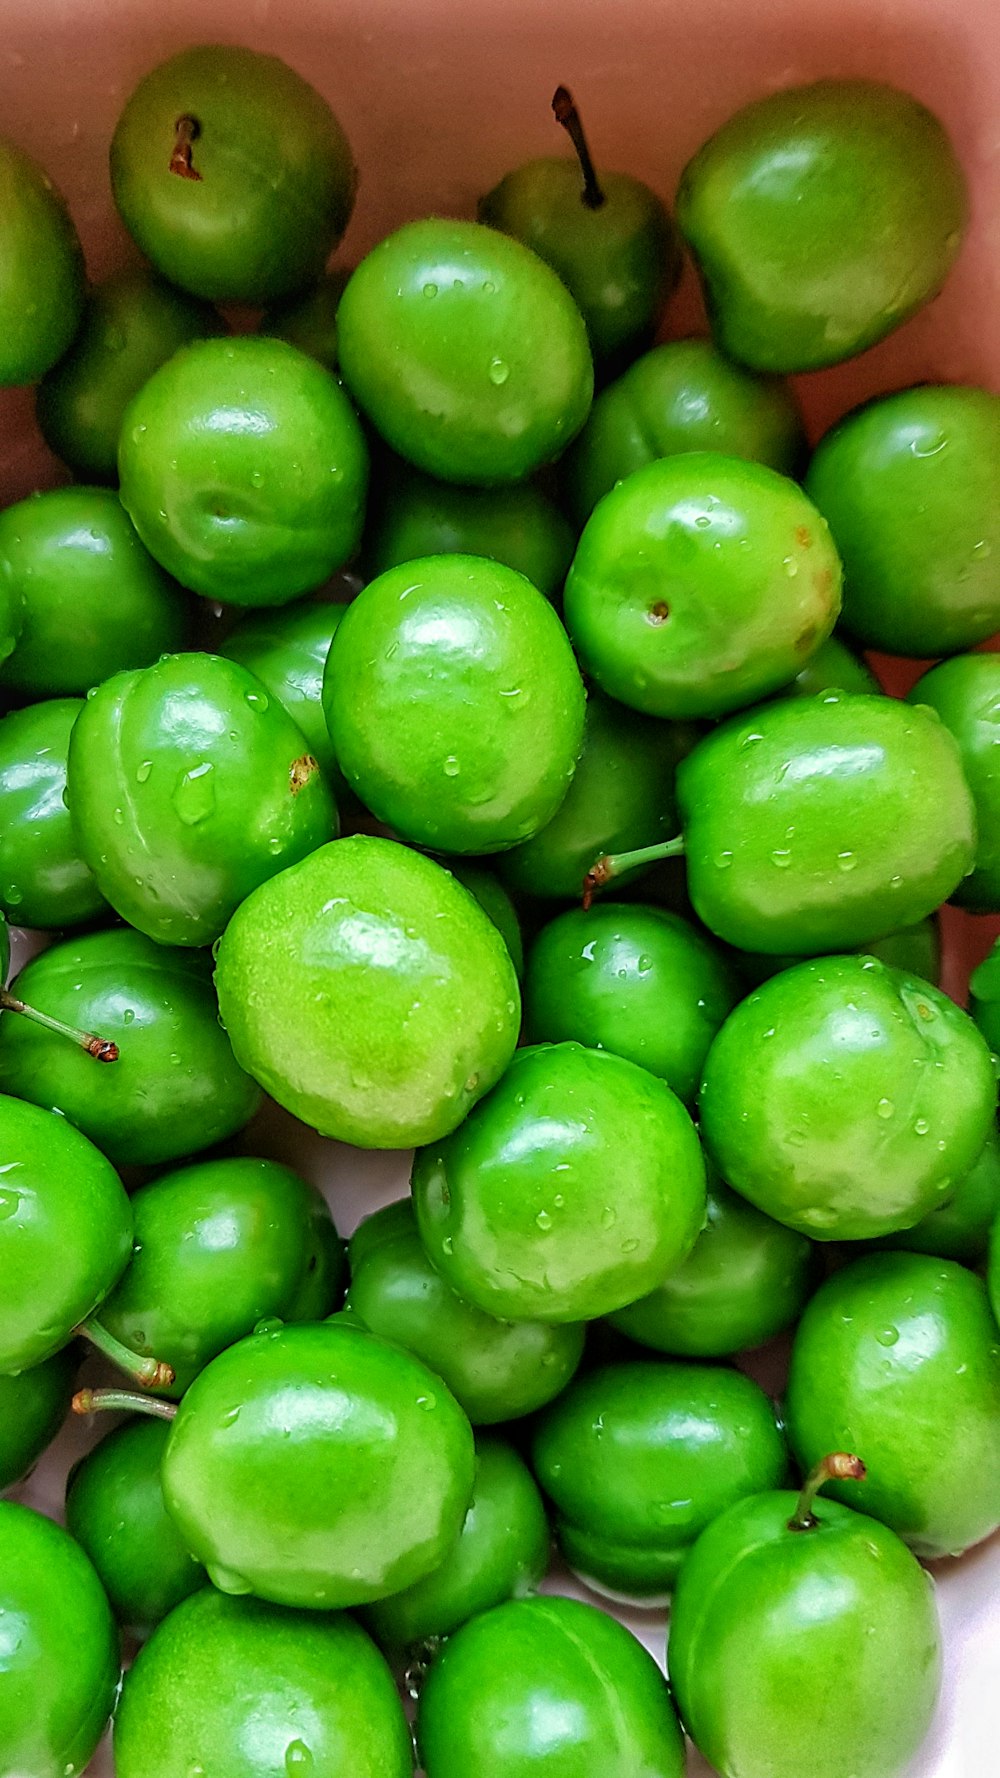 green round fruits on brown wooden table